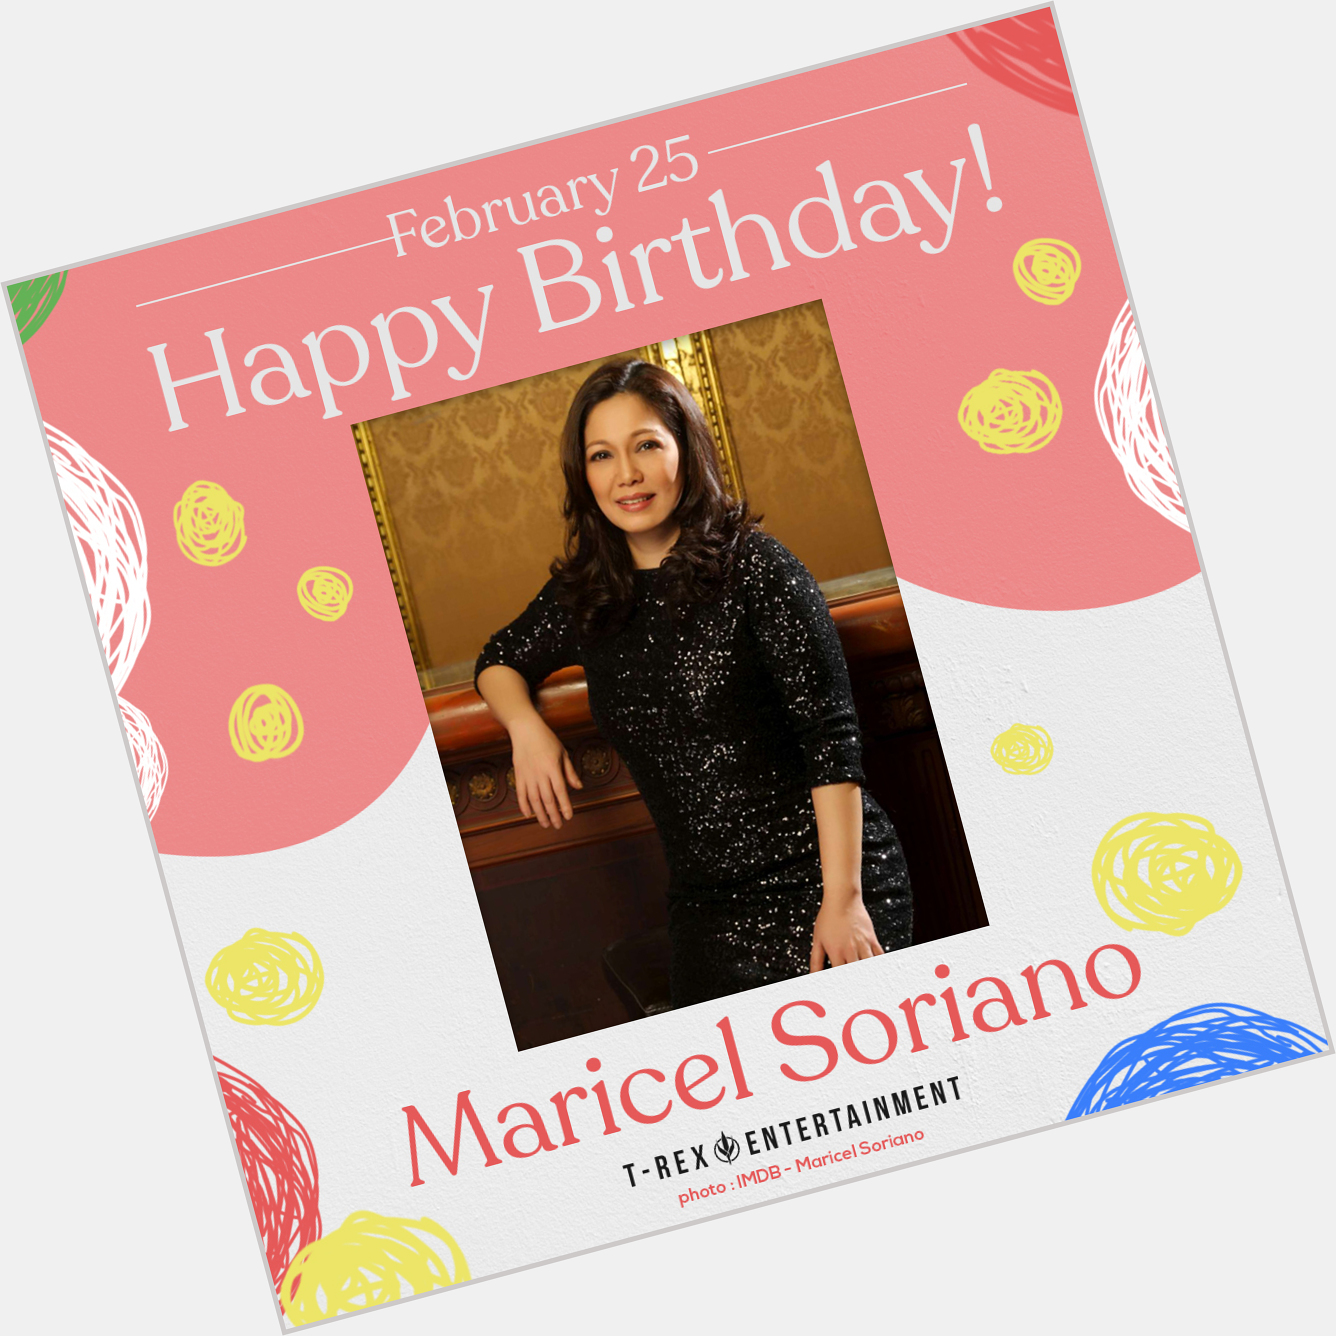 Happy 55th birthday to the one and only Diamond Star, Maricel Soriano! 